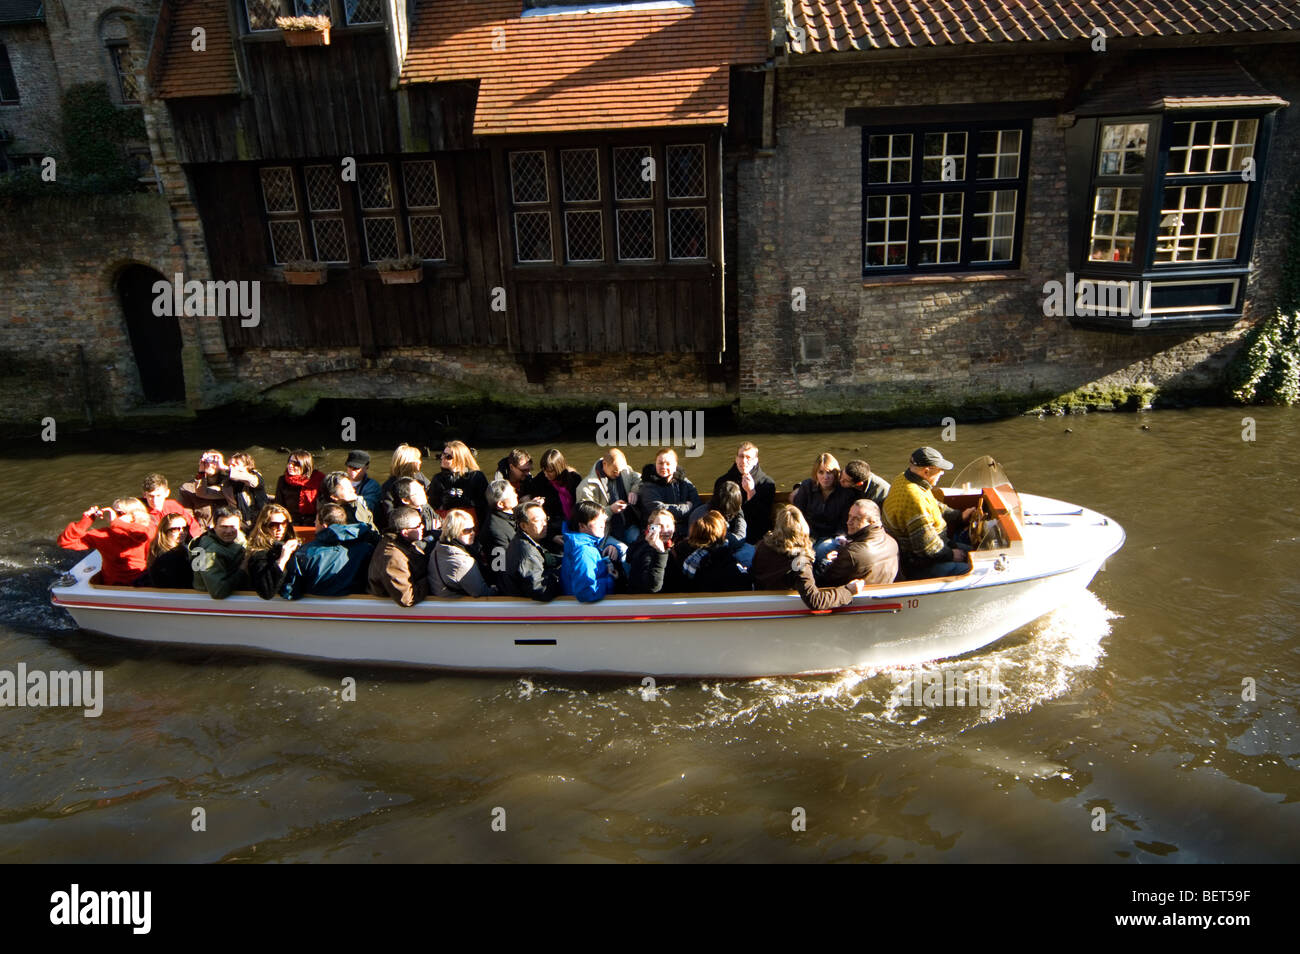 Tourists in boat and wooden rear elevation along canal in Bruges, Belgium Stock Photo